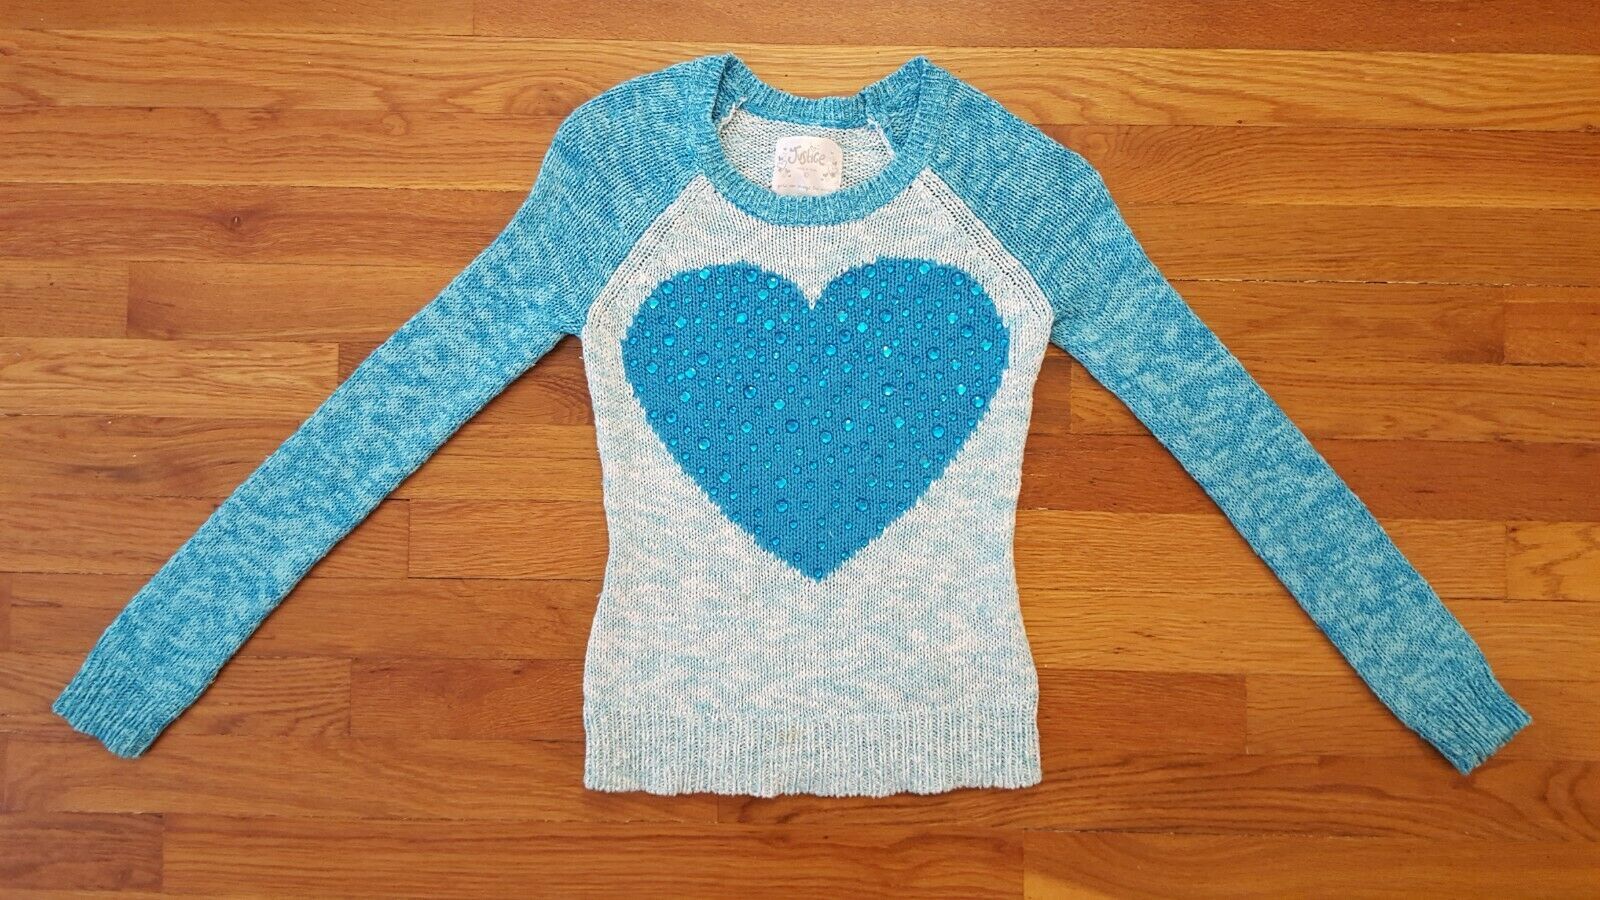 Primary image for Justice Girl Girls Heart Rhinestone Teal Turquoise Long Sleeve Sweater 10